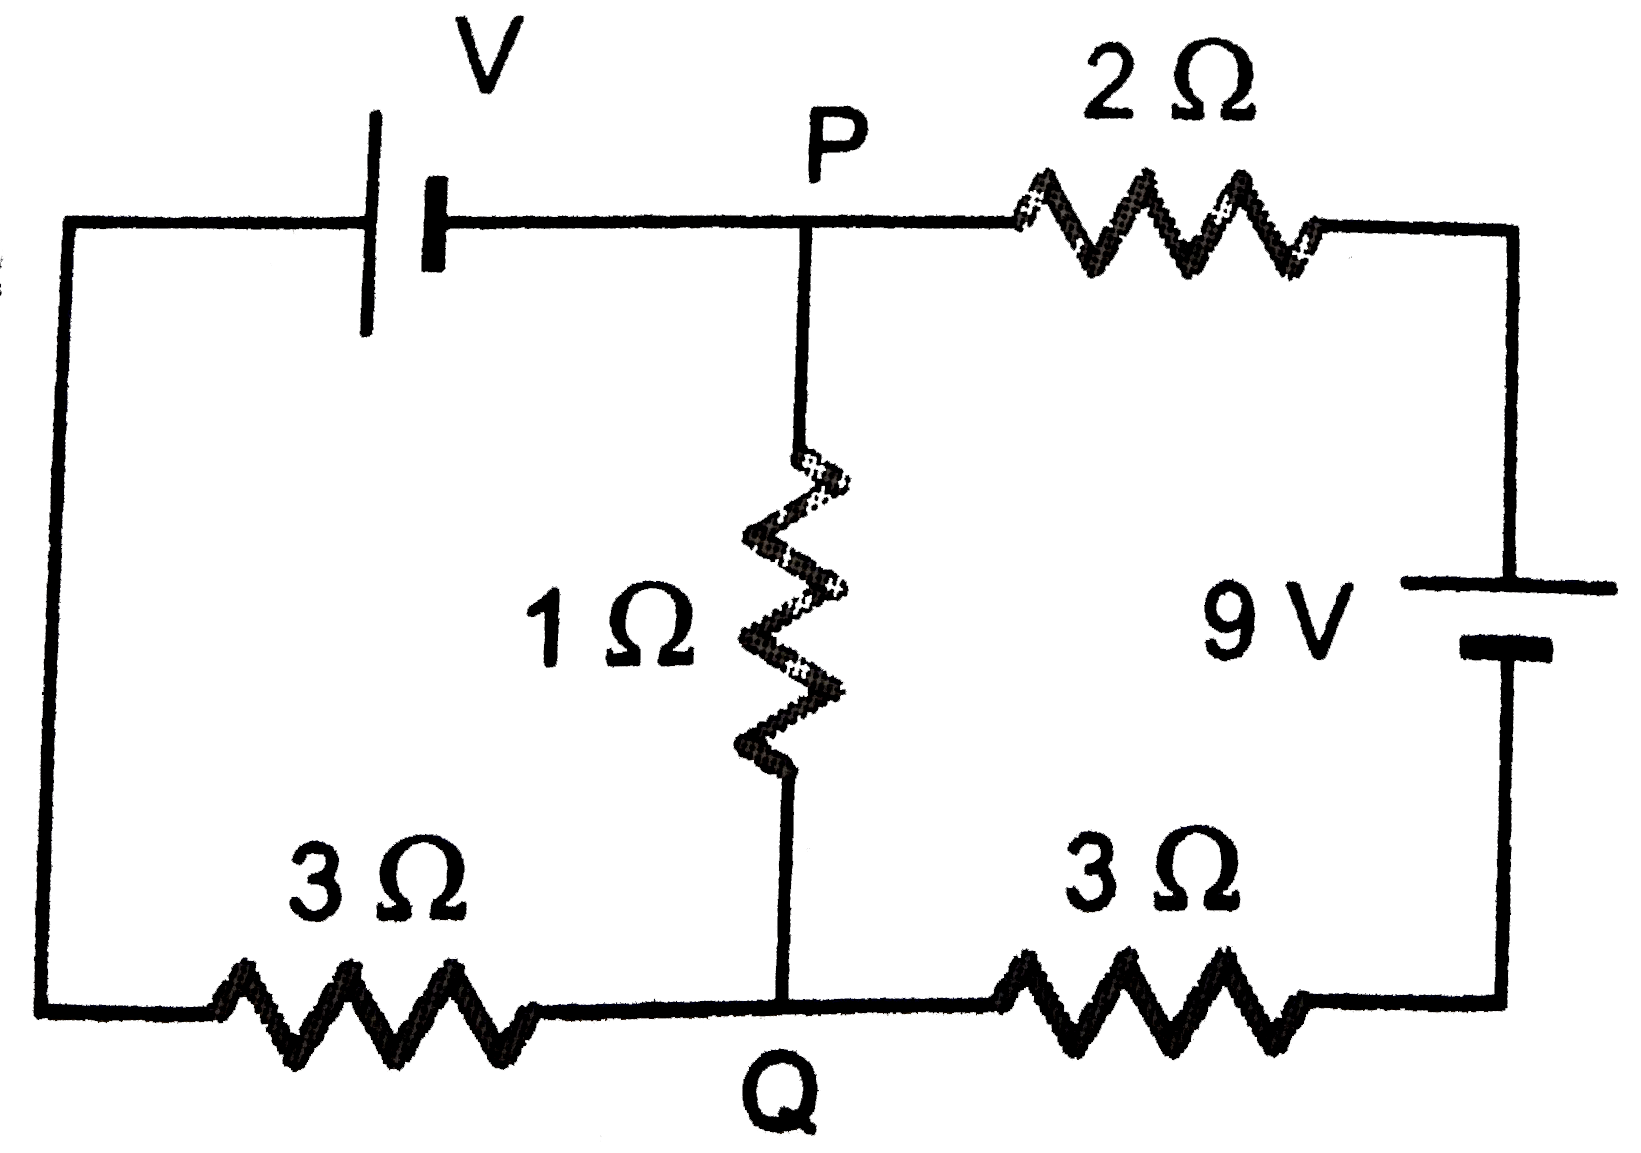 In the circuit shown, the currect in the 1 Omega resistor